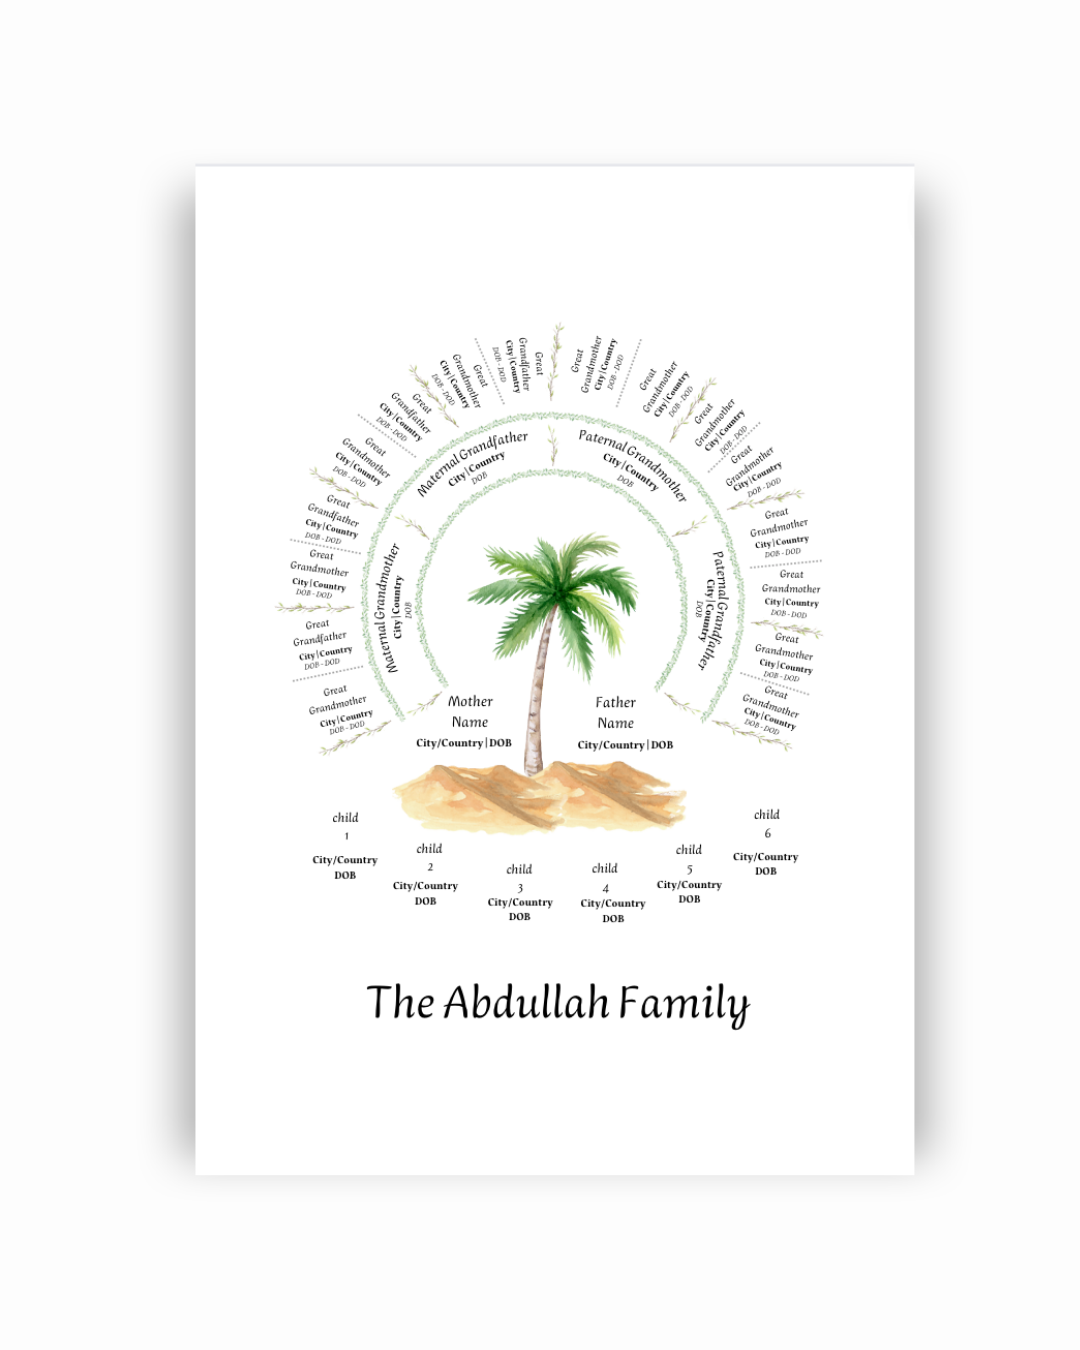 A beautifully designed family tree template made to edit for documenting your family tree.